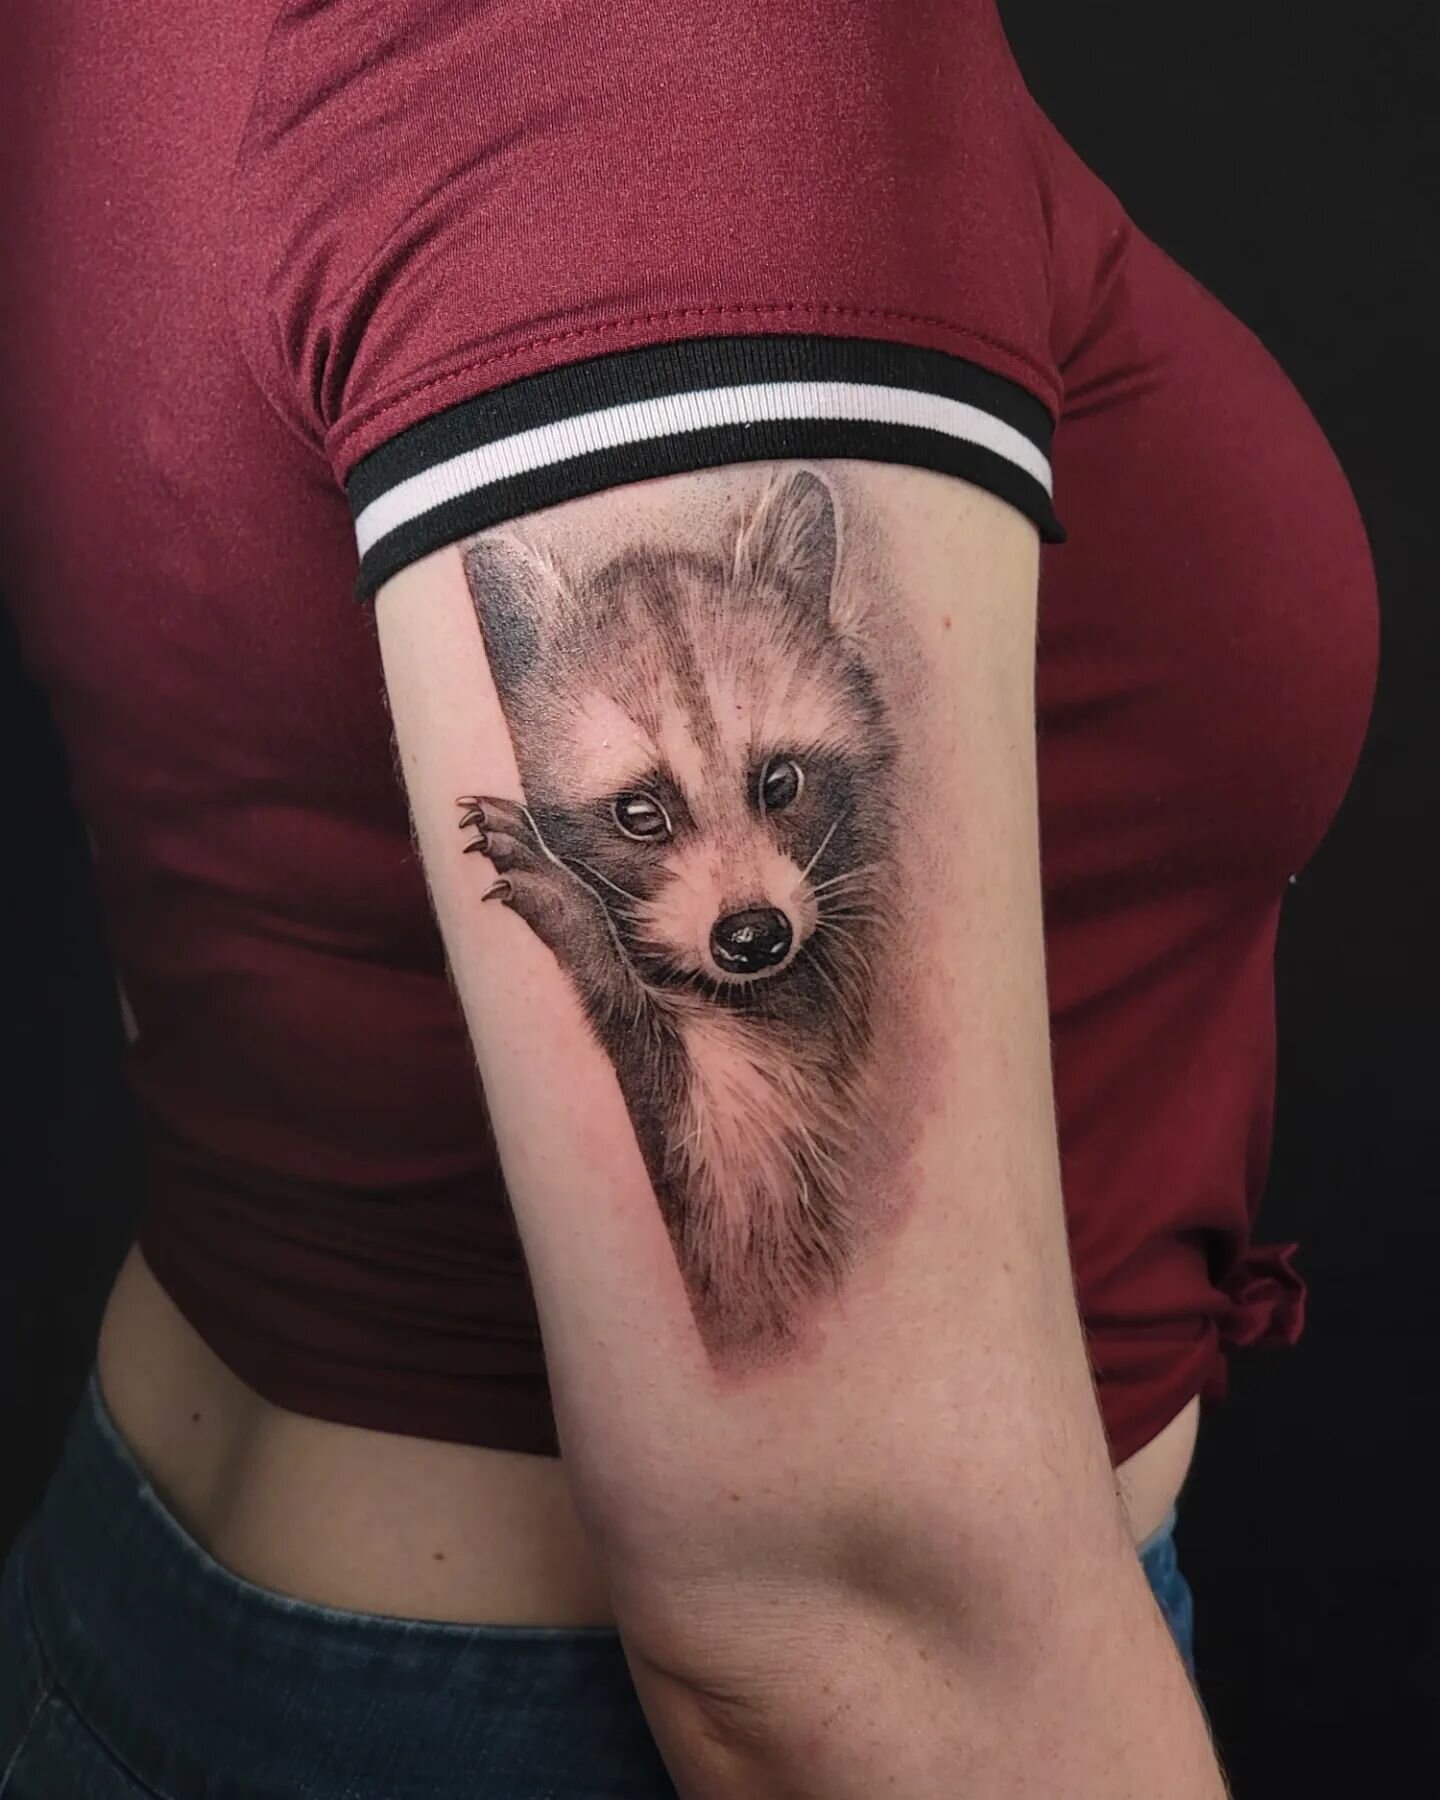 You wanna know what it's like to be a realism artist? It's 50% photoshop and 50% learning to do fur texture.
SWIPE TO SEE DETAILS
.
.
#babyraccoon #babyraccoontattoo #raccoontattoo #animaltattoo #trashpanda #trashpandatattoo #realistictattoo #petport